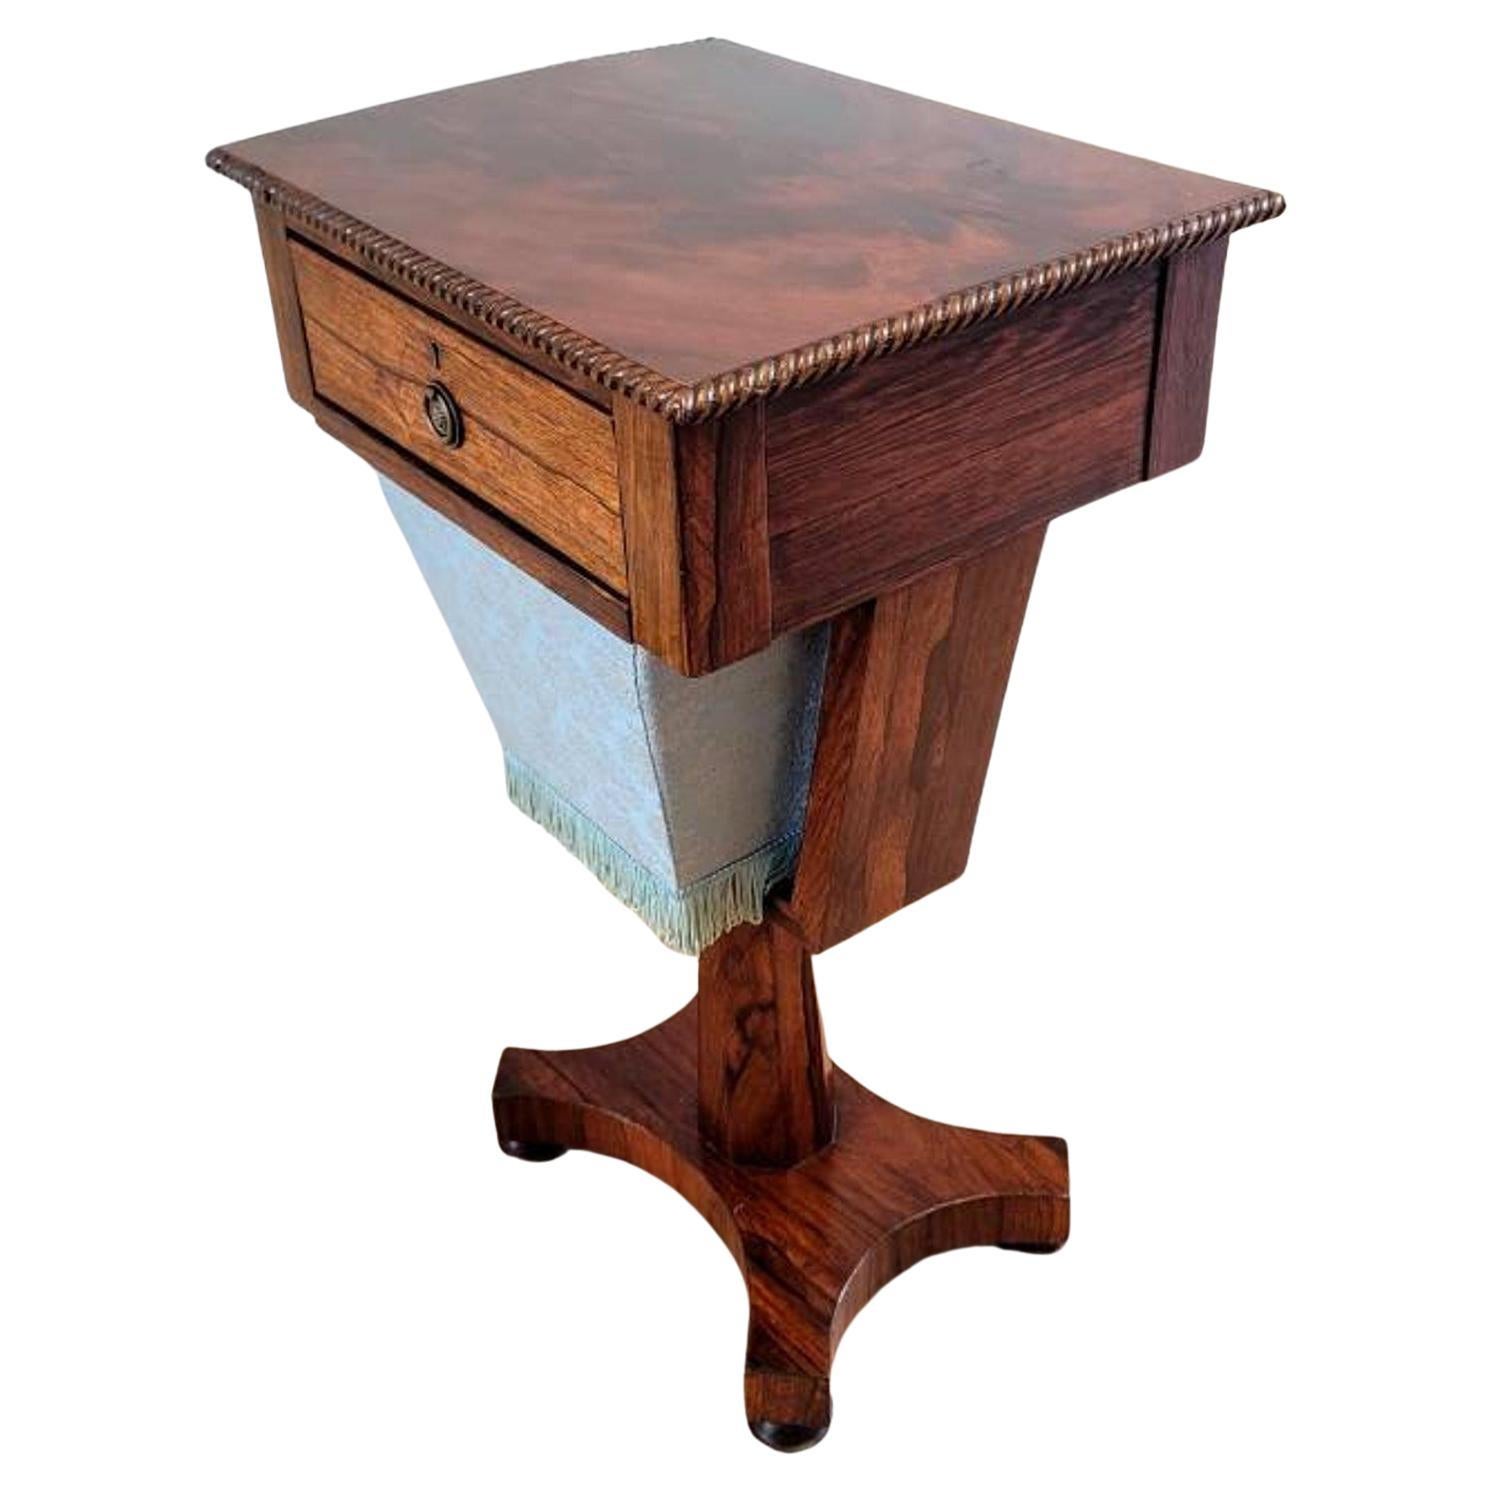 Early 19th Century English Regency Period Sewing Table For Sale